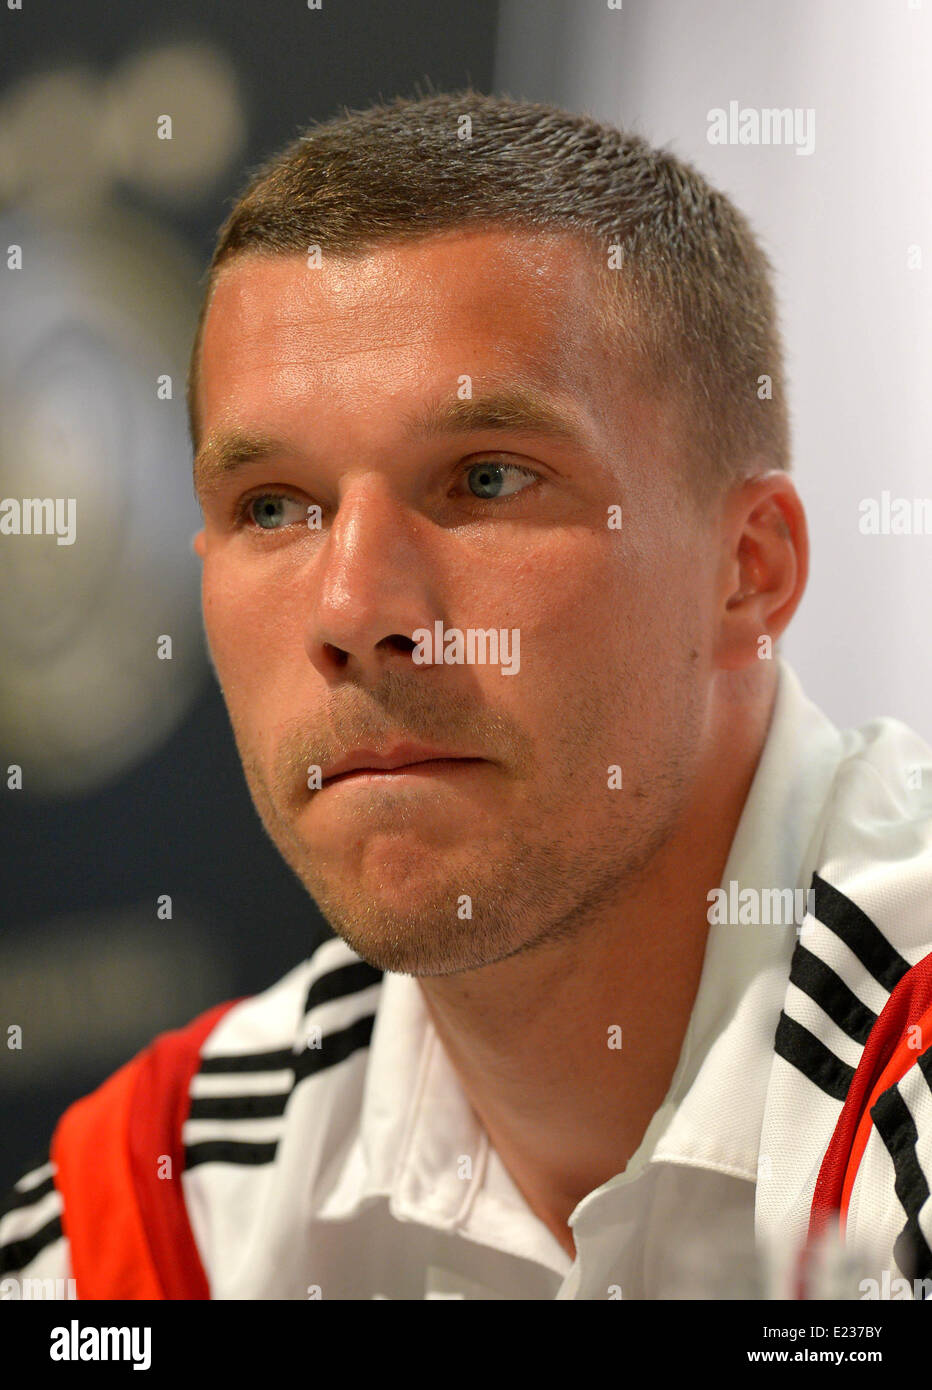 Lukas Podolski attends a press conference of the German national soccer team in Santo Andre, Brazil, 14 June 2014. The FIFA World Cup 2014 will take place in Brazil from 12 June to 13 July 2014. Photo: Thomas Eisenhuth/dpa Stock Photo